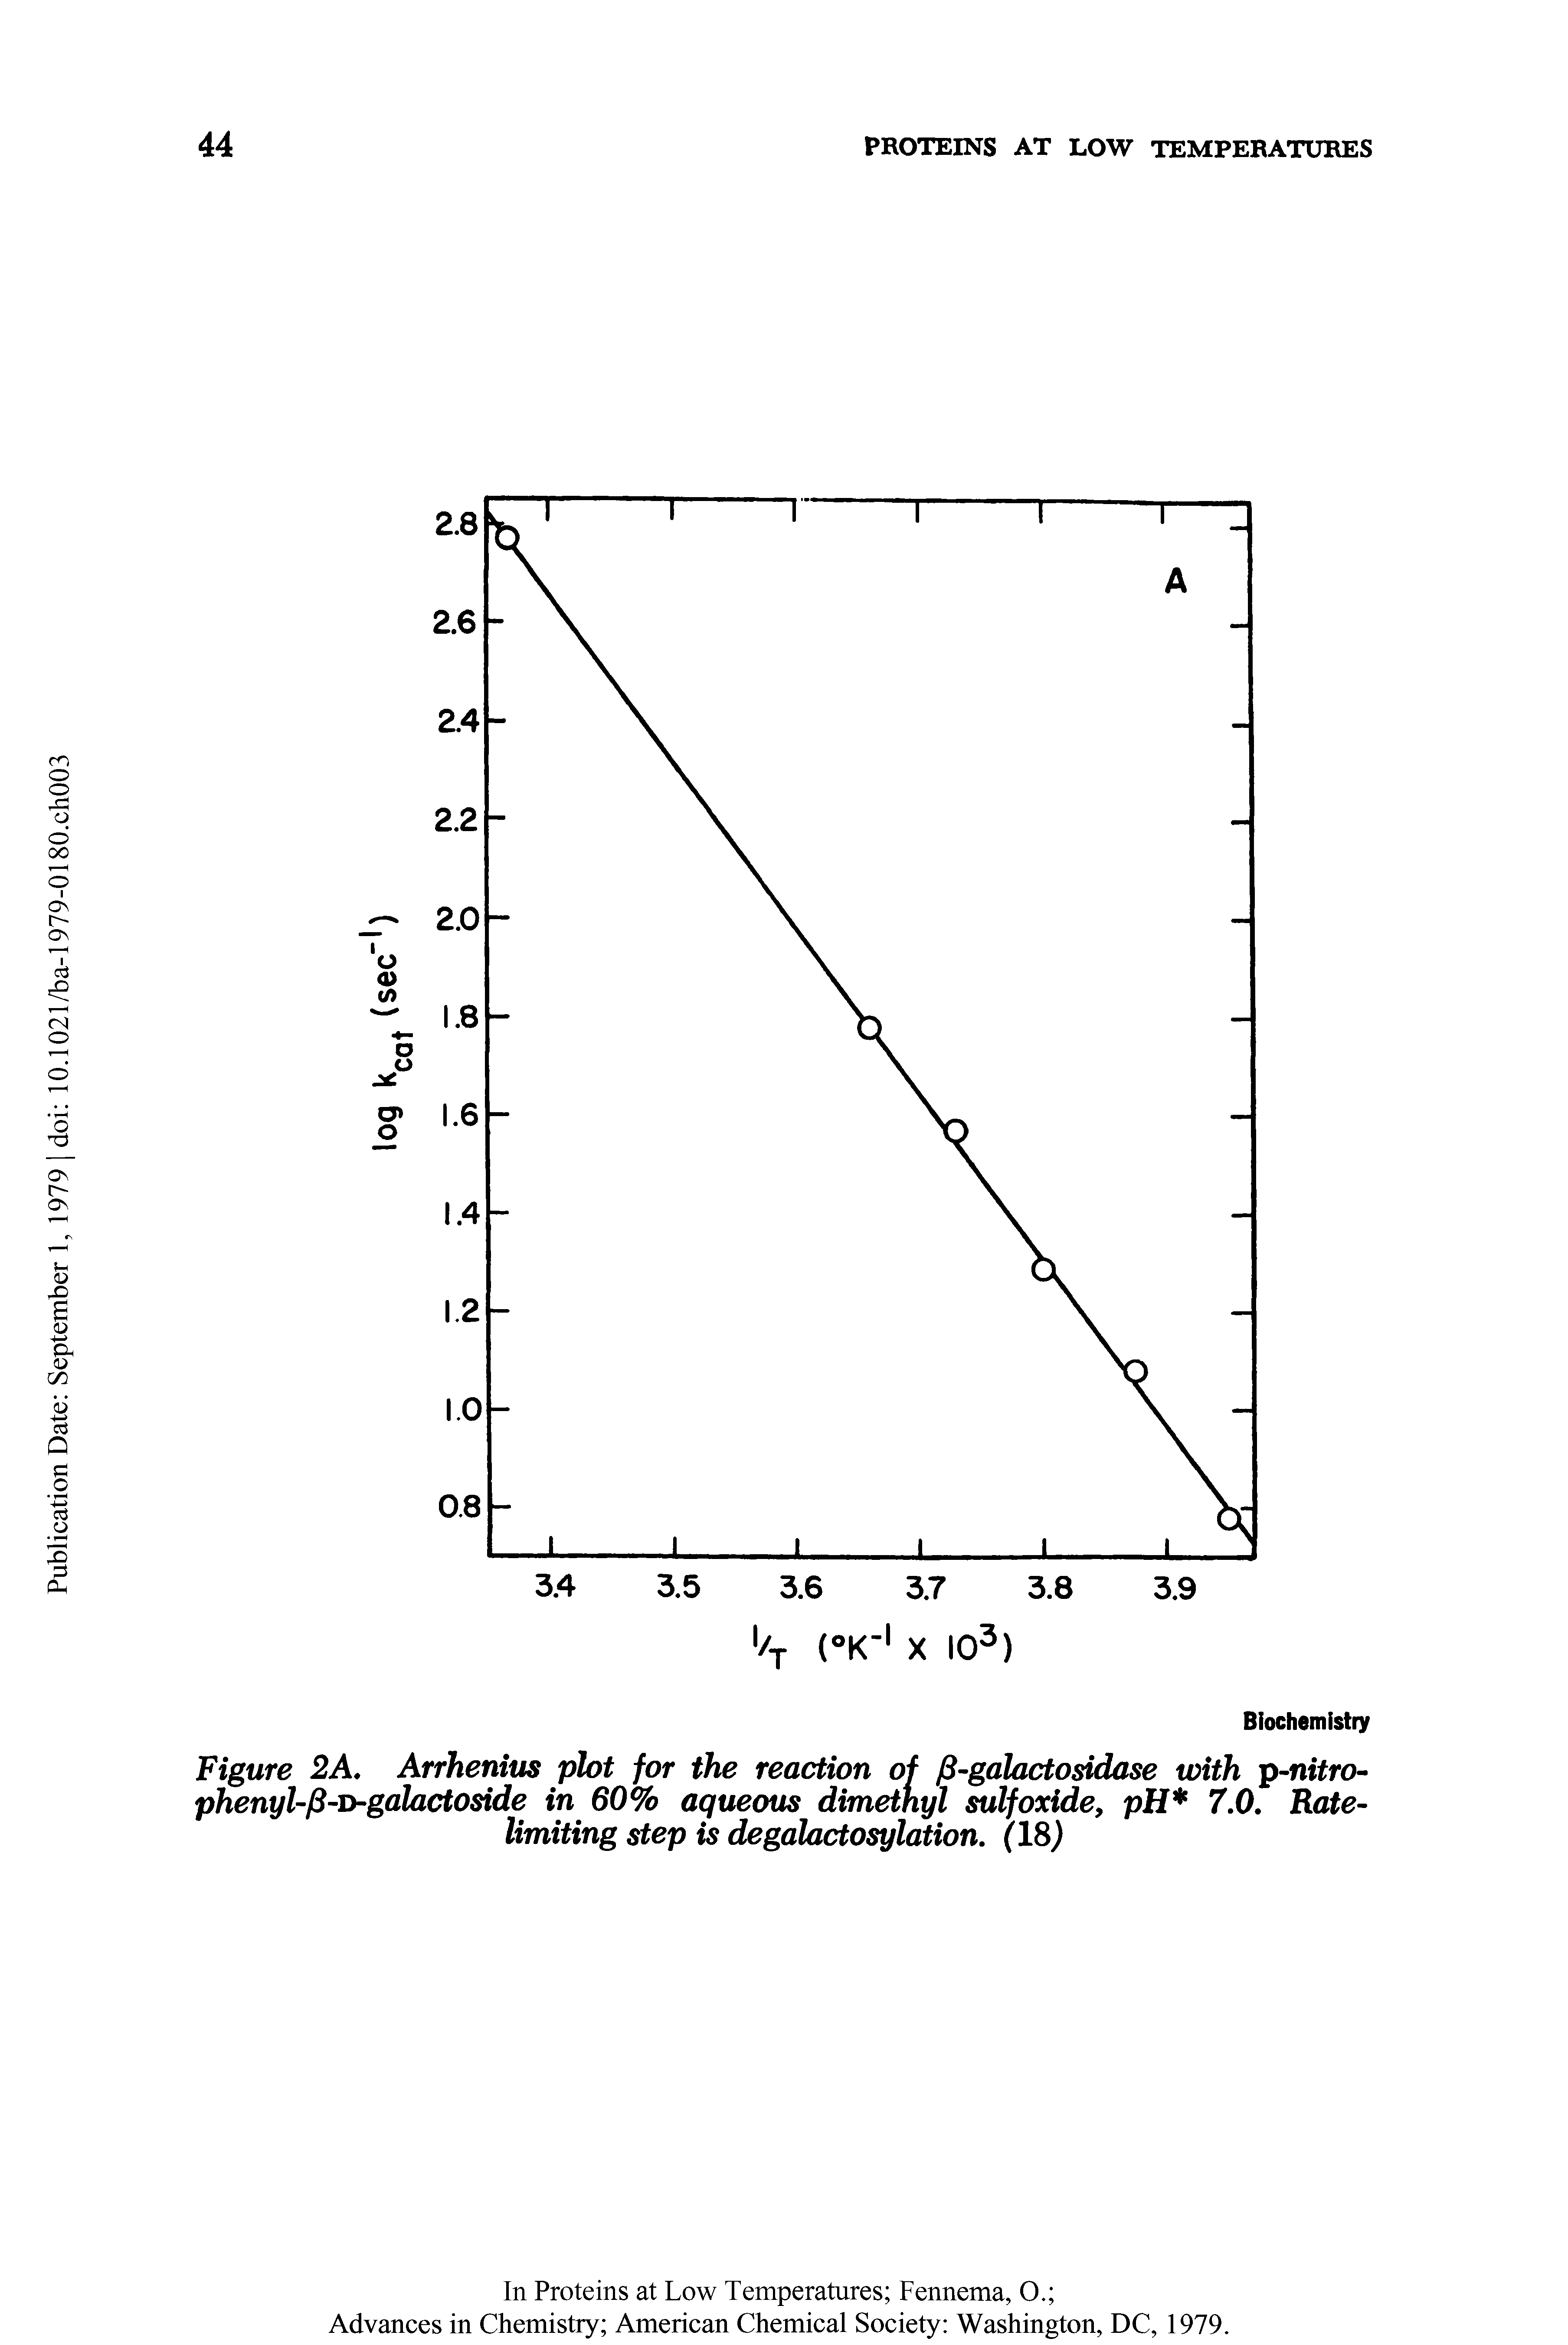 Figure 2A. Arrhenius plot for the reaction of /3-galactosidase with p-nitro-phenyl-/3-i>-galactoside in 60% aqueous dimethyl sulfoxide, pH 7.0. Rate-limiting step is degalactosylation. (IS)...